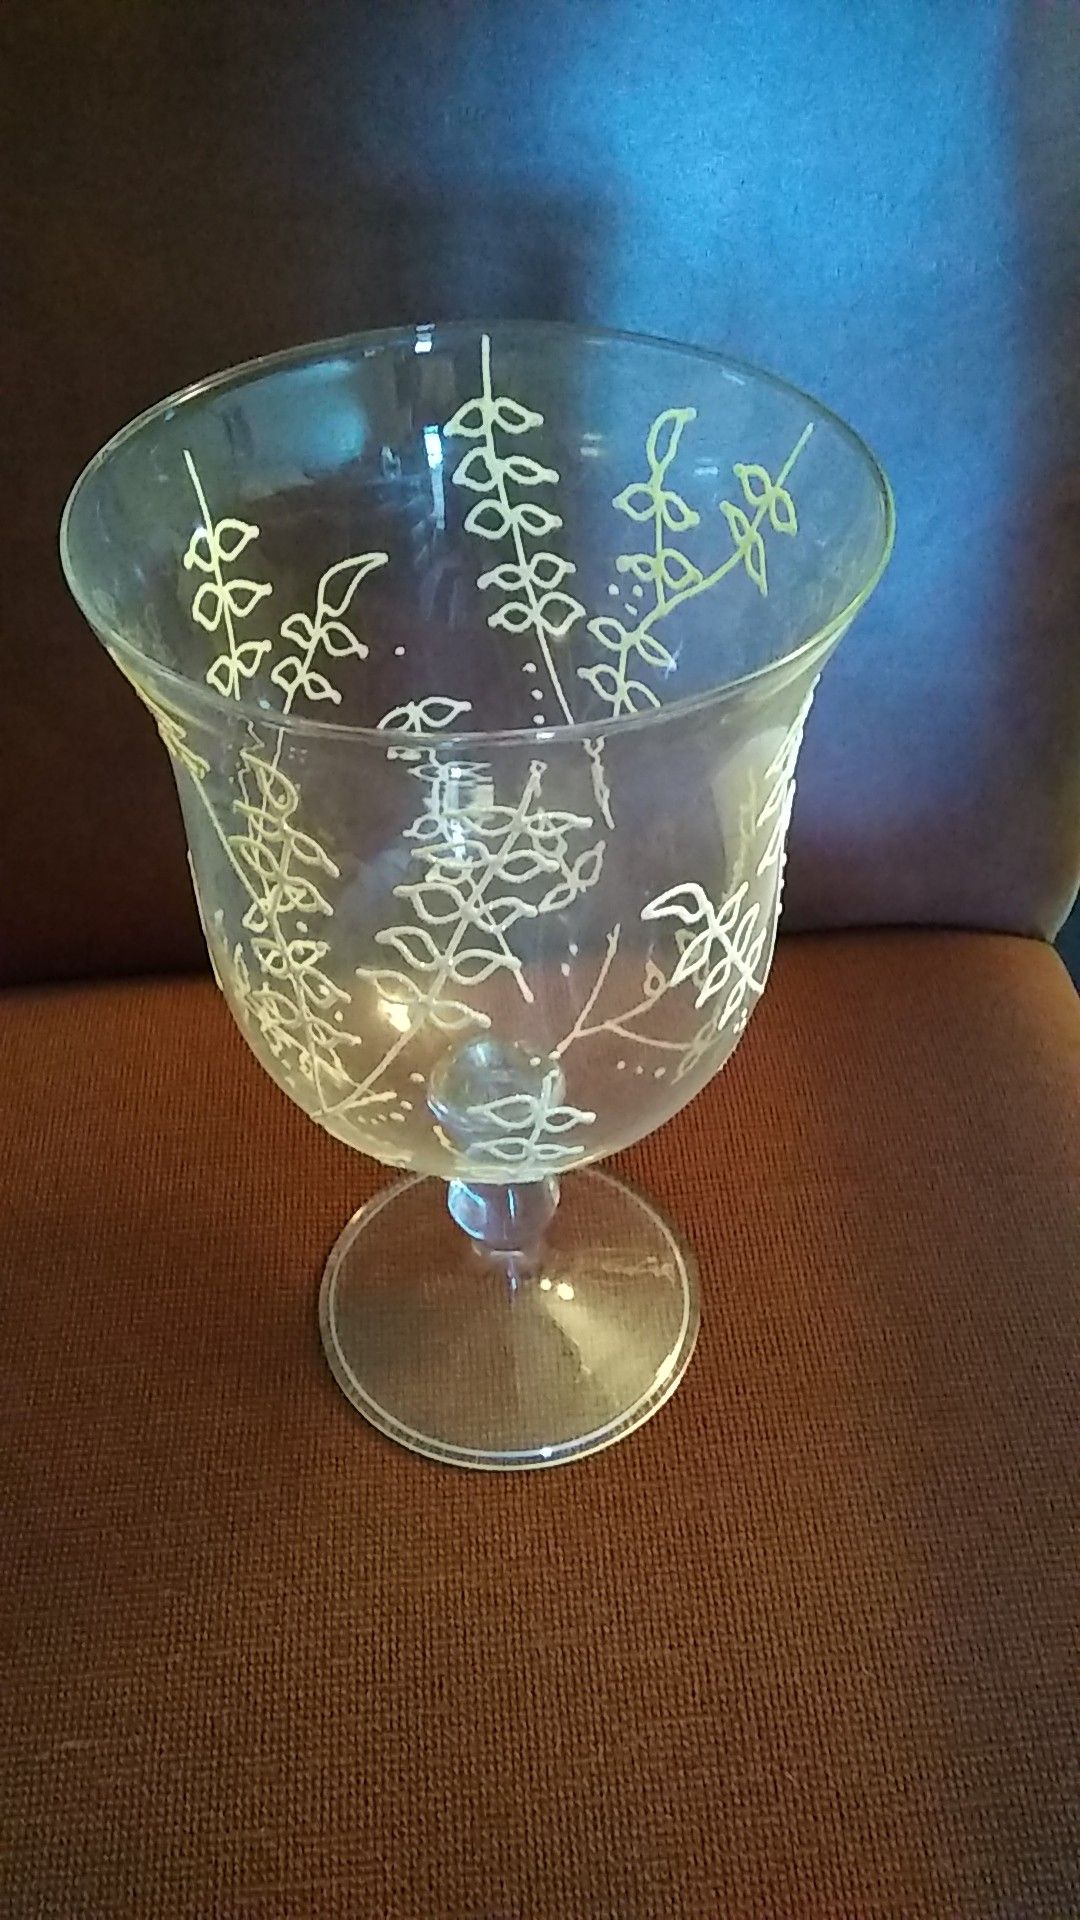 Glassware for Holidays 12 in ht by 7.5 in wide at top